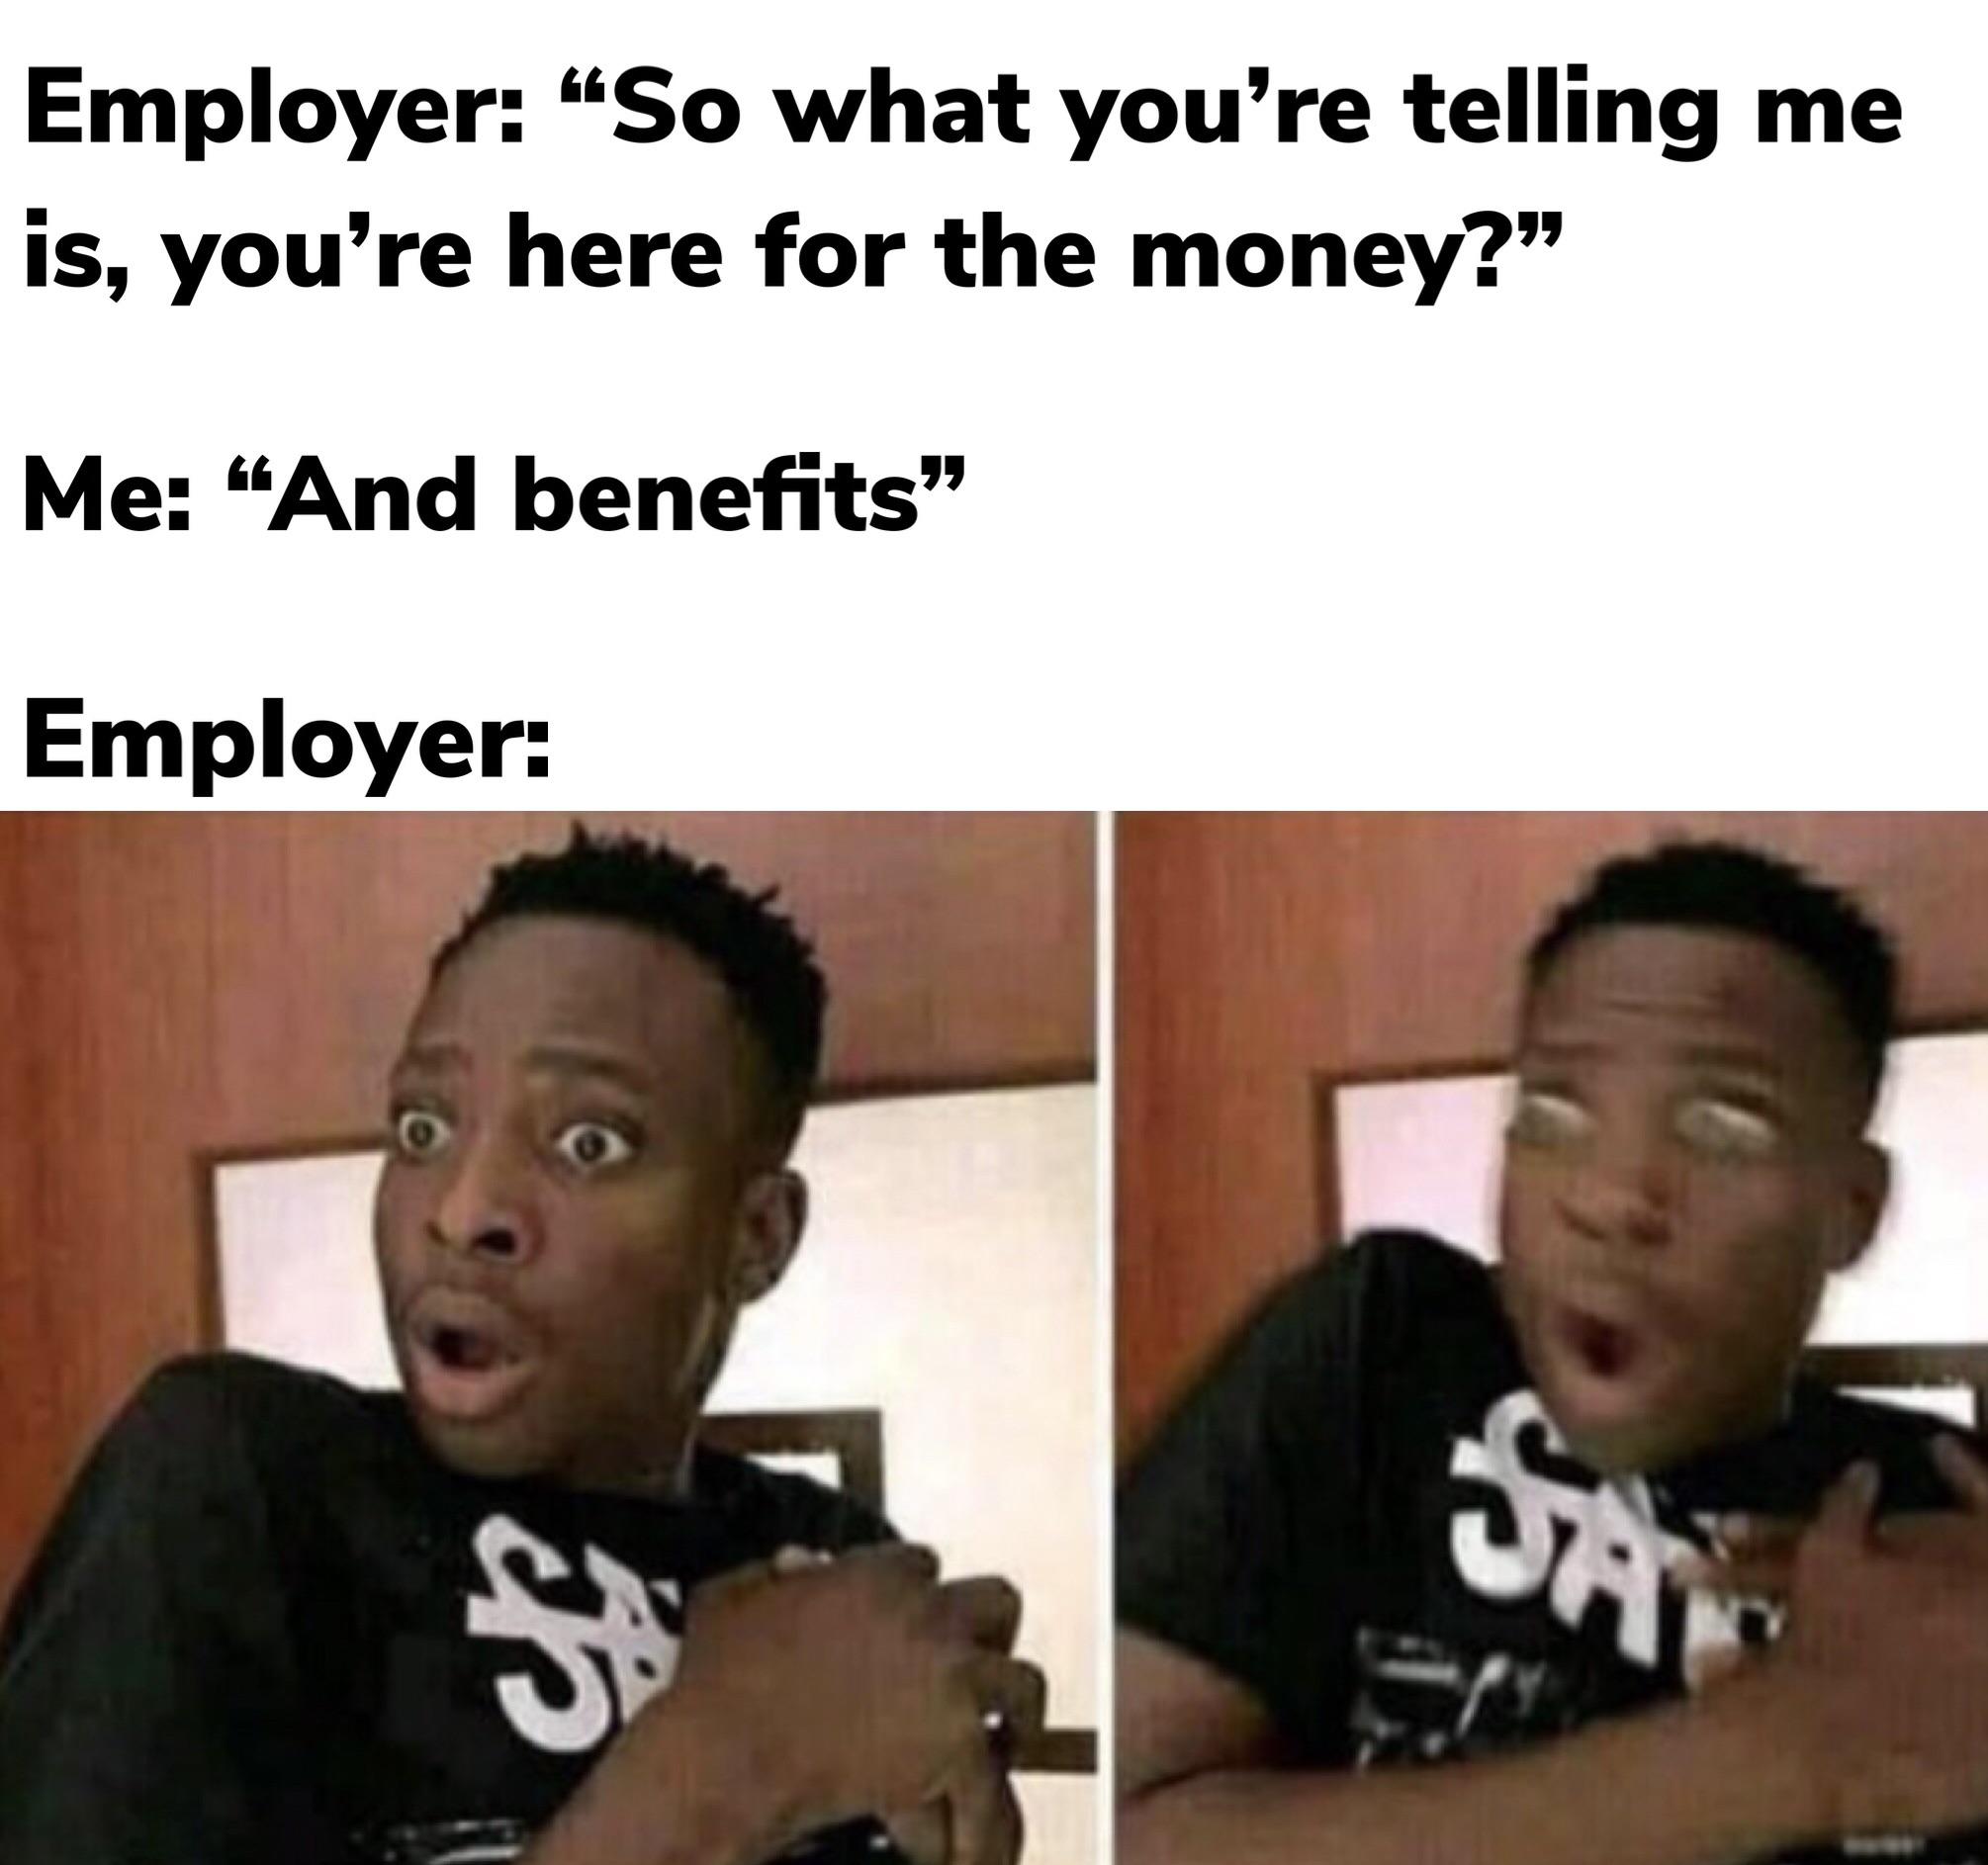 hilarious memes - employer meme - Employer "So what you're telling me is, you're here for the money?" Me "And benefits" Employer Sa so S